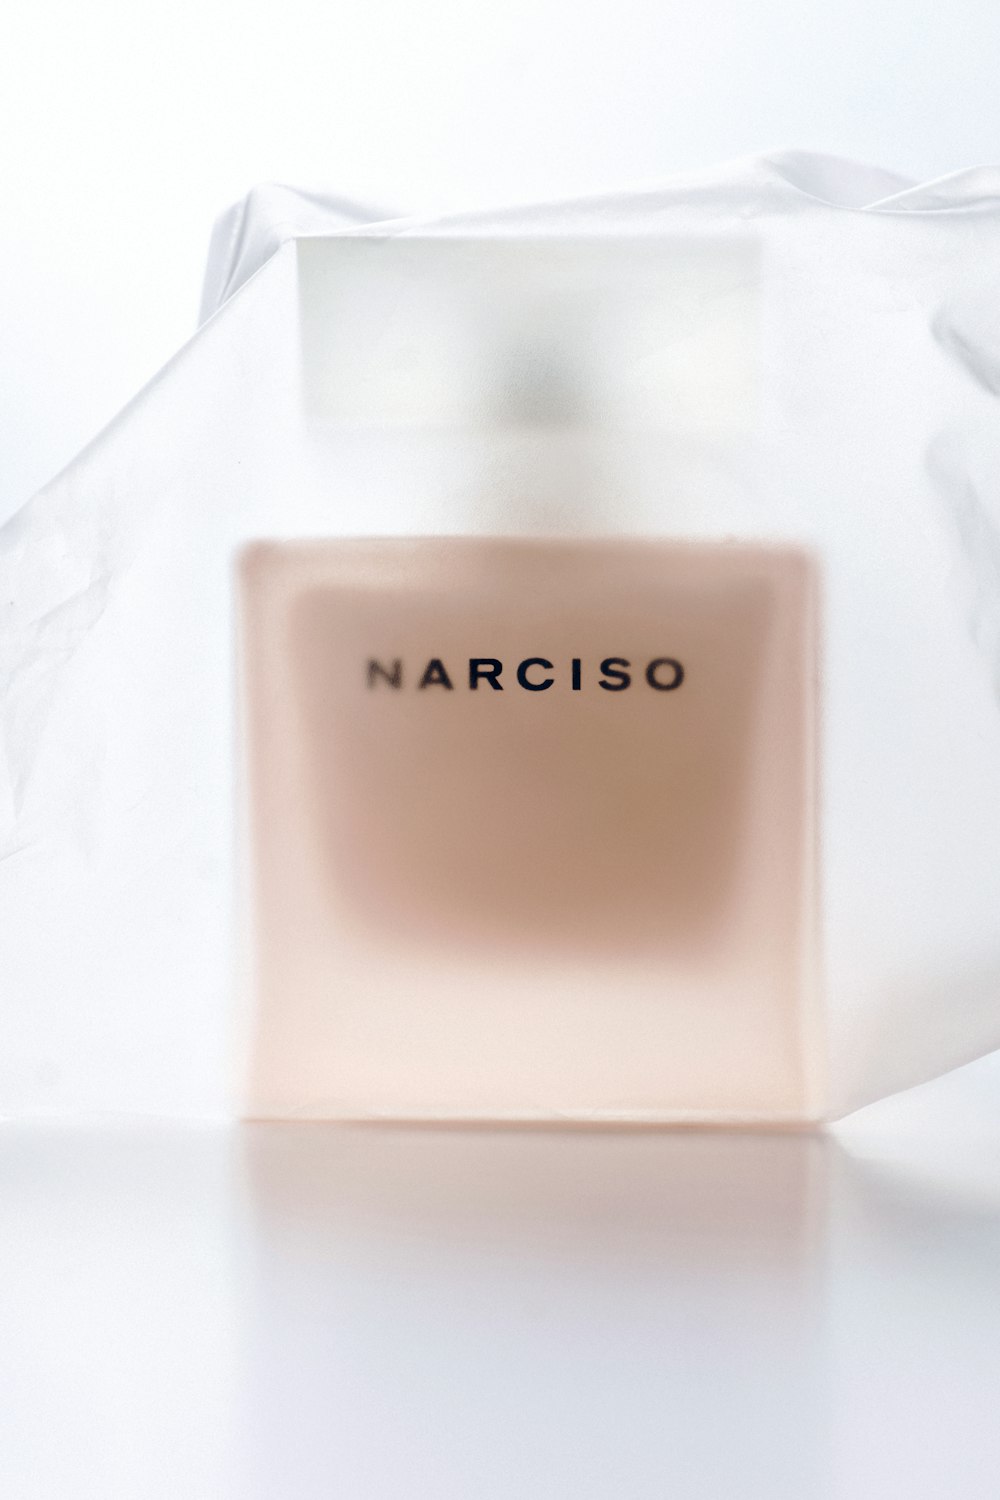 a bottle of narciso on a white surface